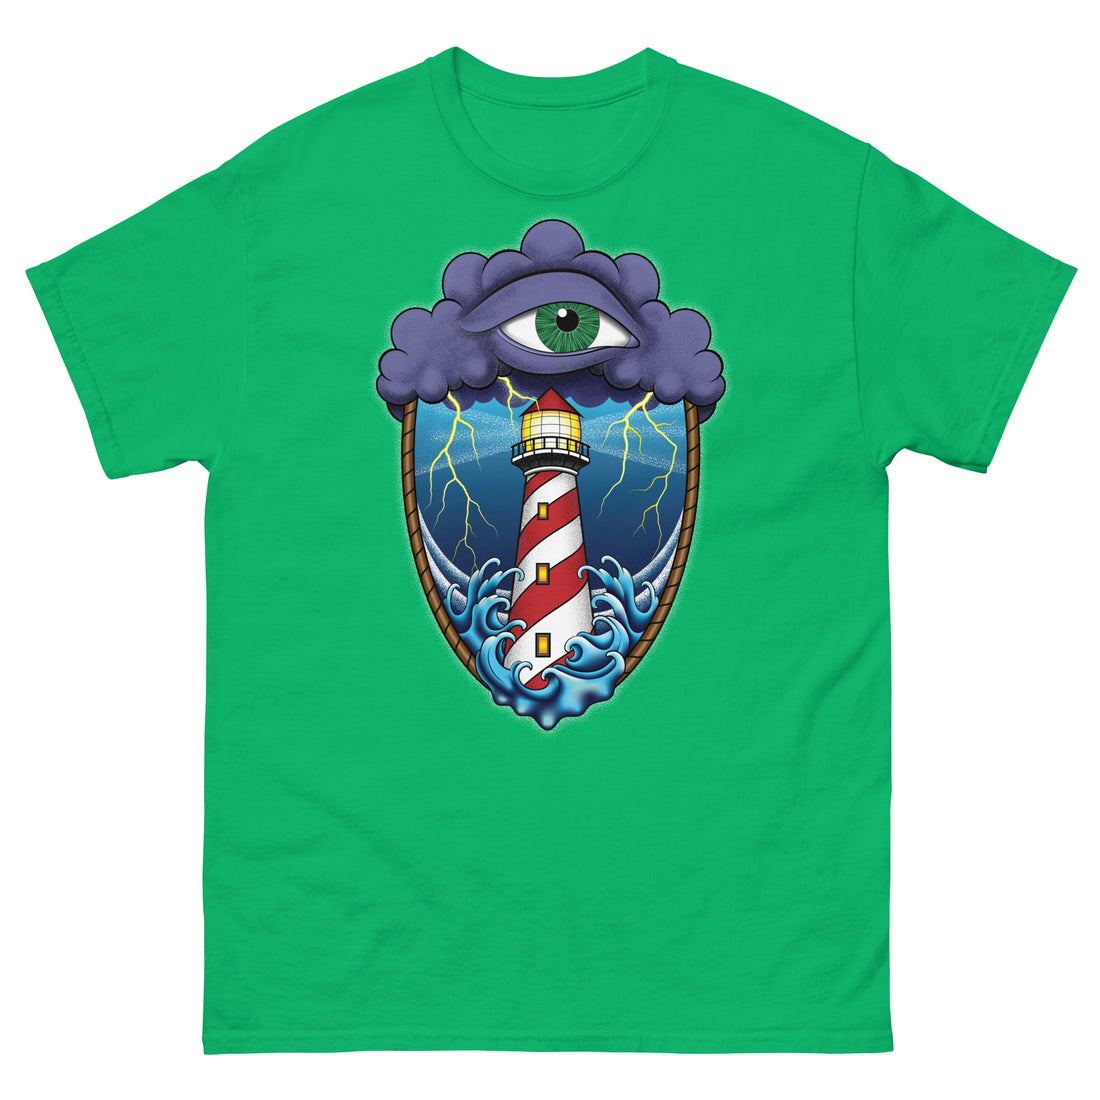 A bright green t-shirt with an old school eye of the storm tattoo design of large dark purple storm clouds at the top of the design with a green eye in the middle of the clouds.  Below the clouds is an oval shape with brown rope. Inside the rope are stormy seas and a lighthouse with lightning striking in the background.  At the bottom of the design, some of the waves are spilling out of the rope barrier. The sky and seas are hues of blue; the lighthouse is white and red striped like a barber pole.